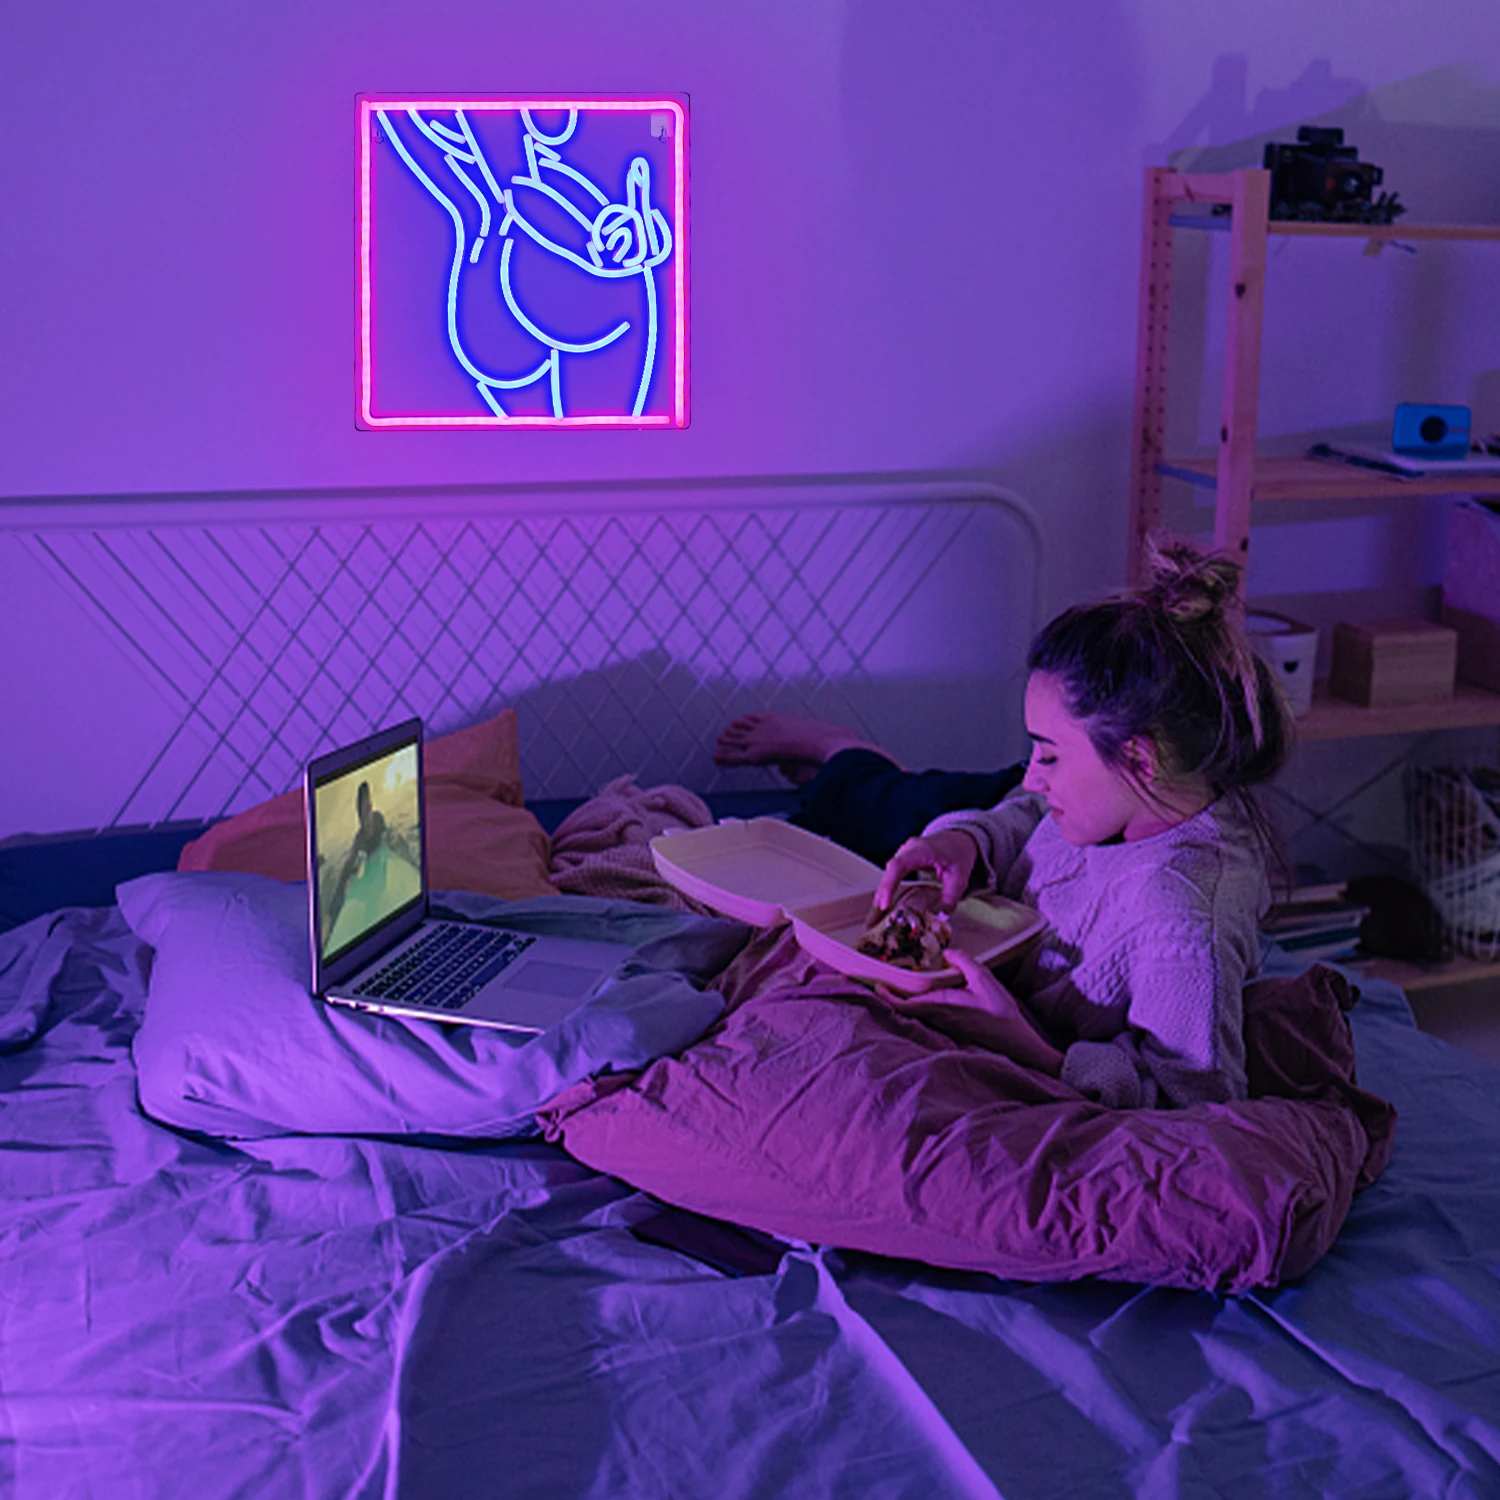 Wanxing Sexy woman neon sign, middle finger led neon sign, Sexy girl led light, female ass night light up images - 6